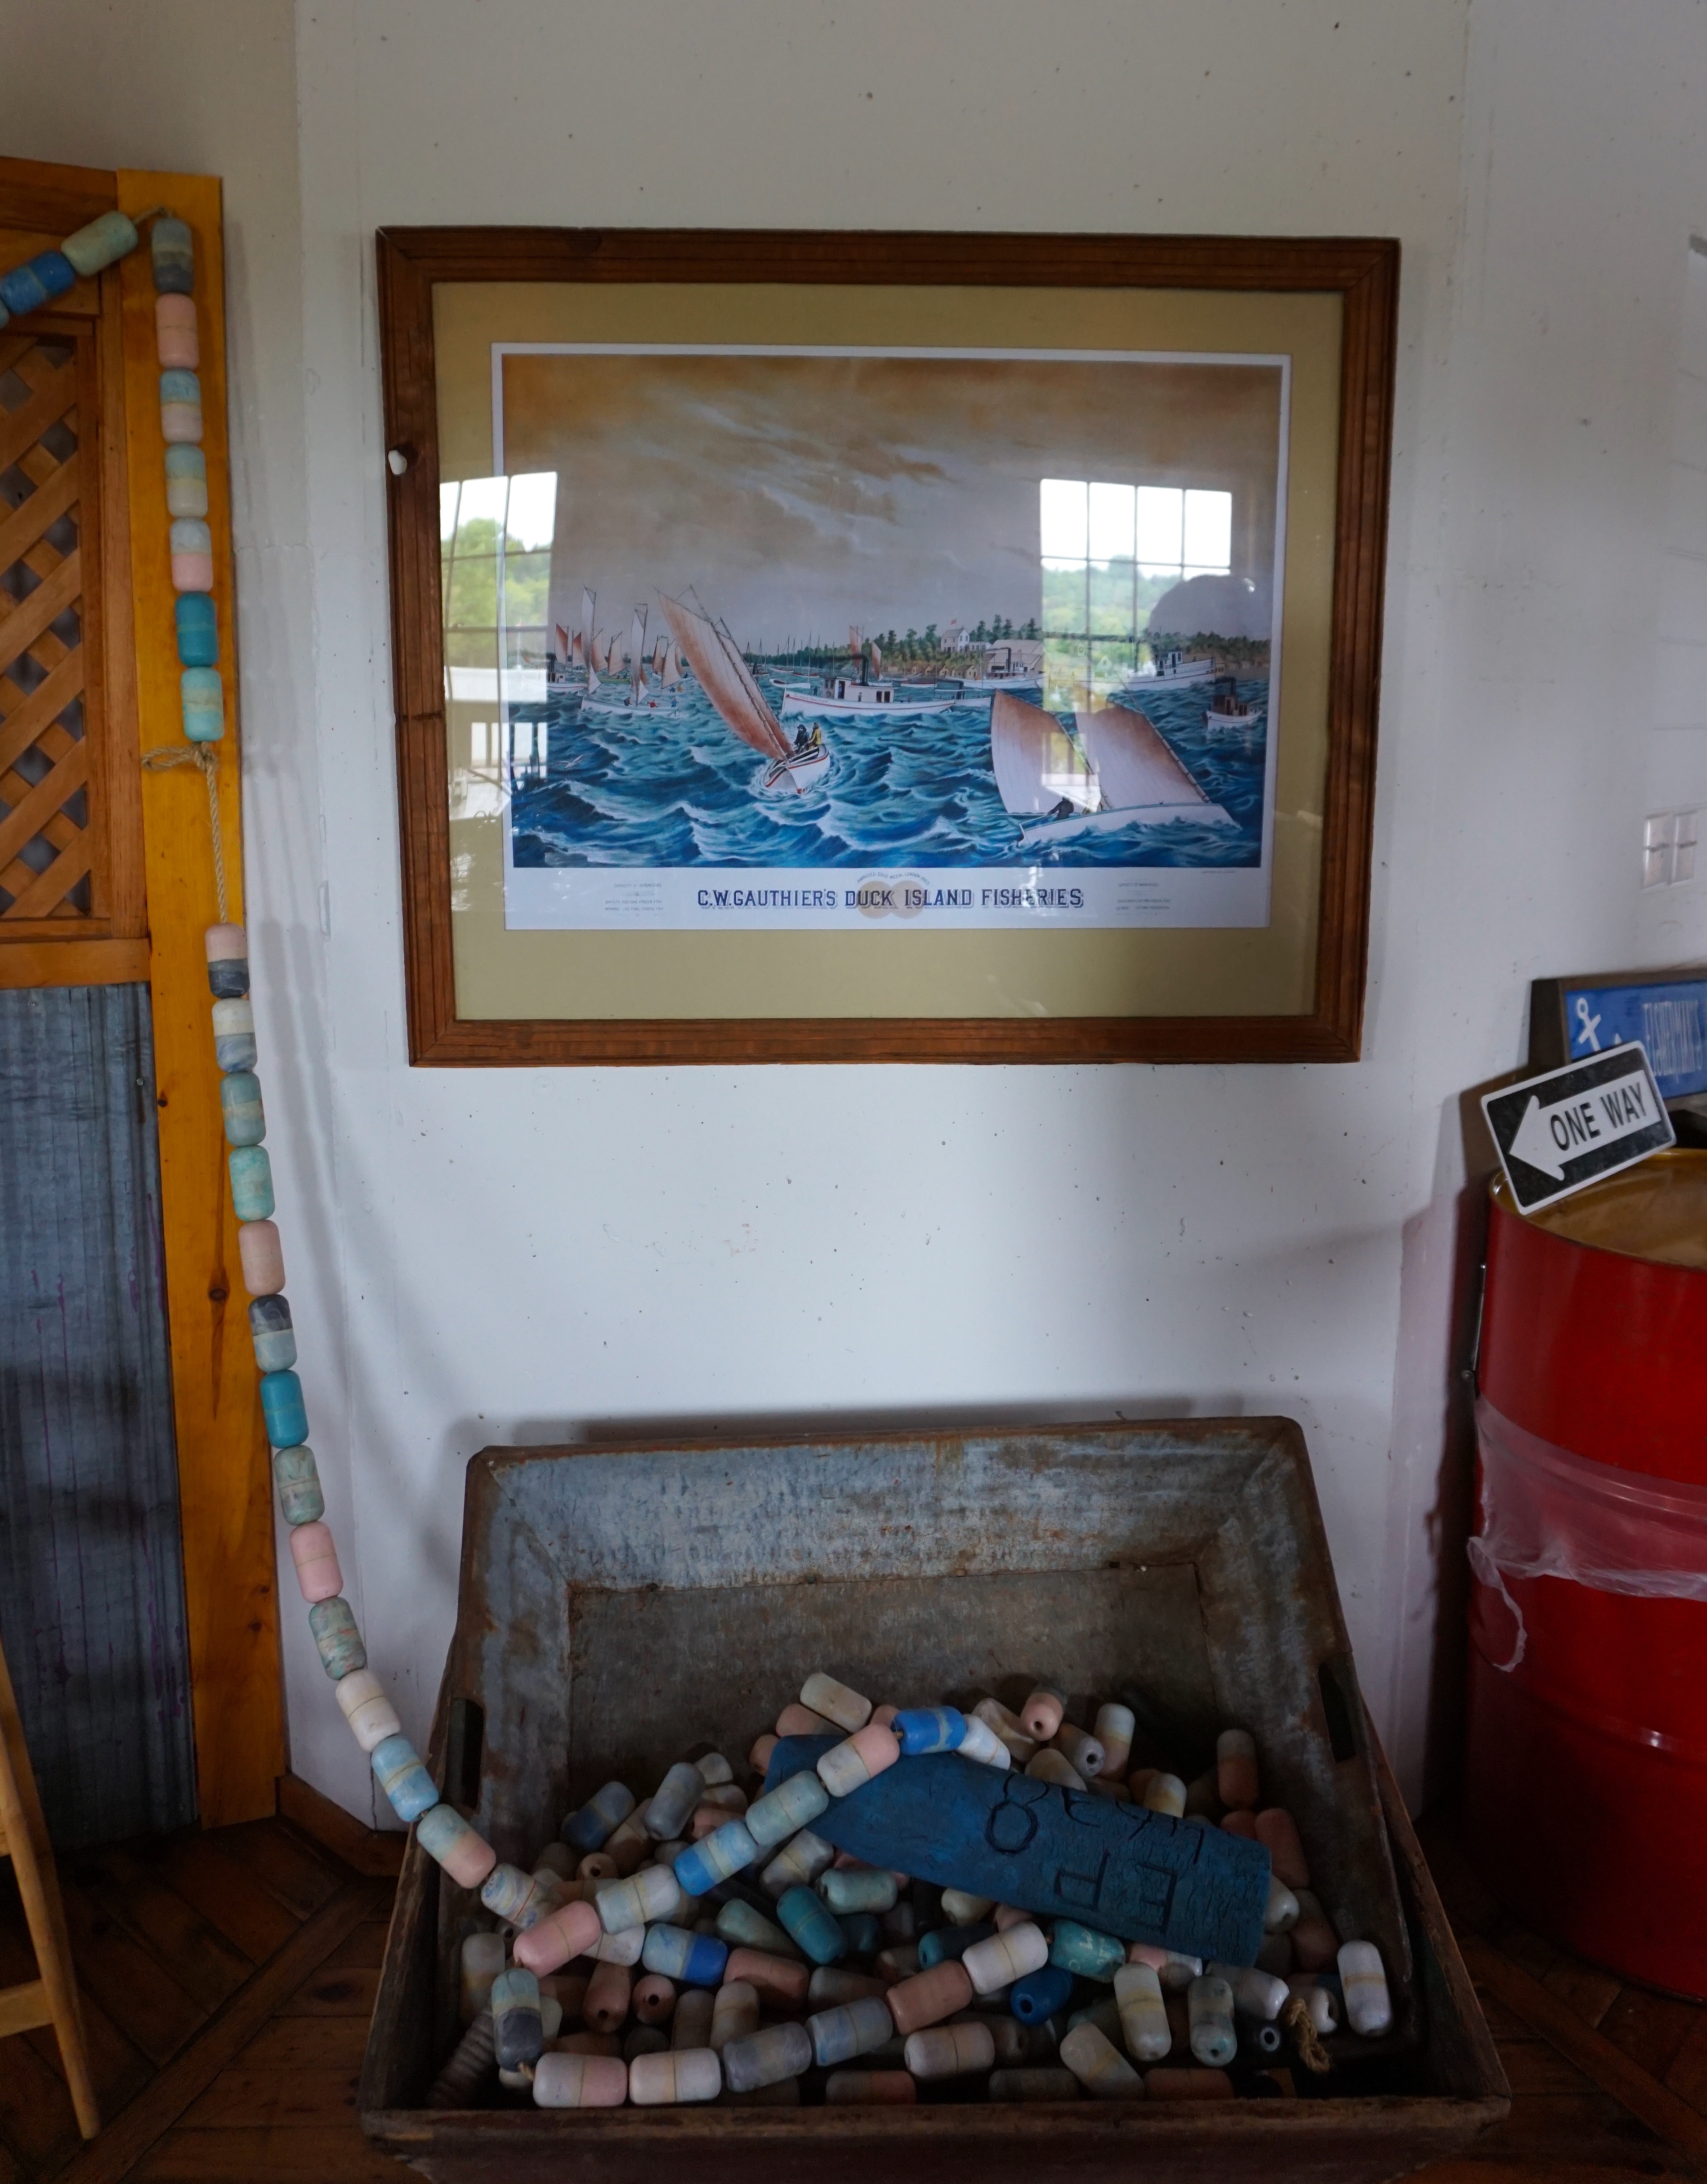 a painting at Purvis Fish & Chips of a harbour, along with some signs and seafaring artifacts